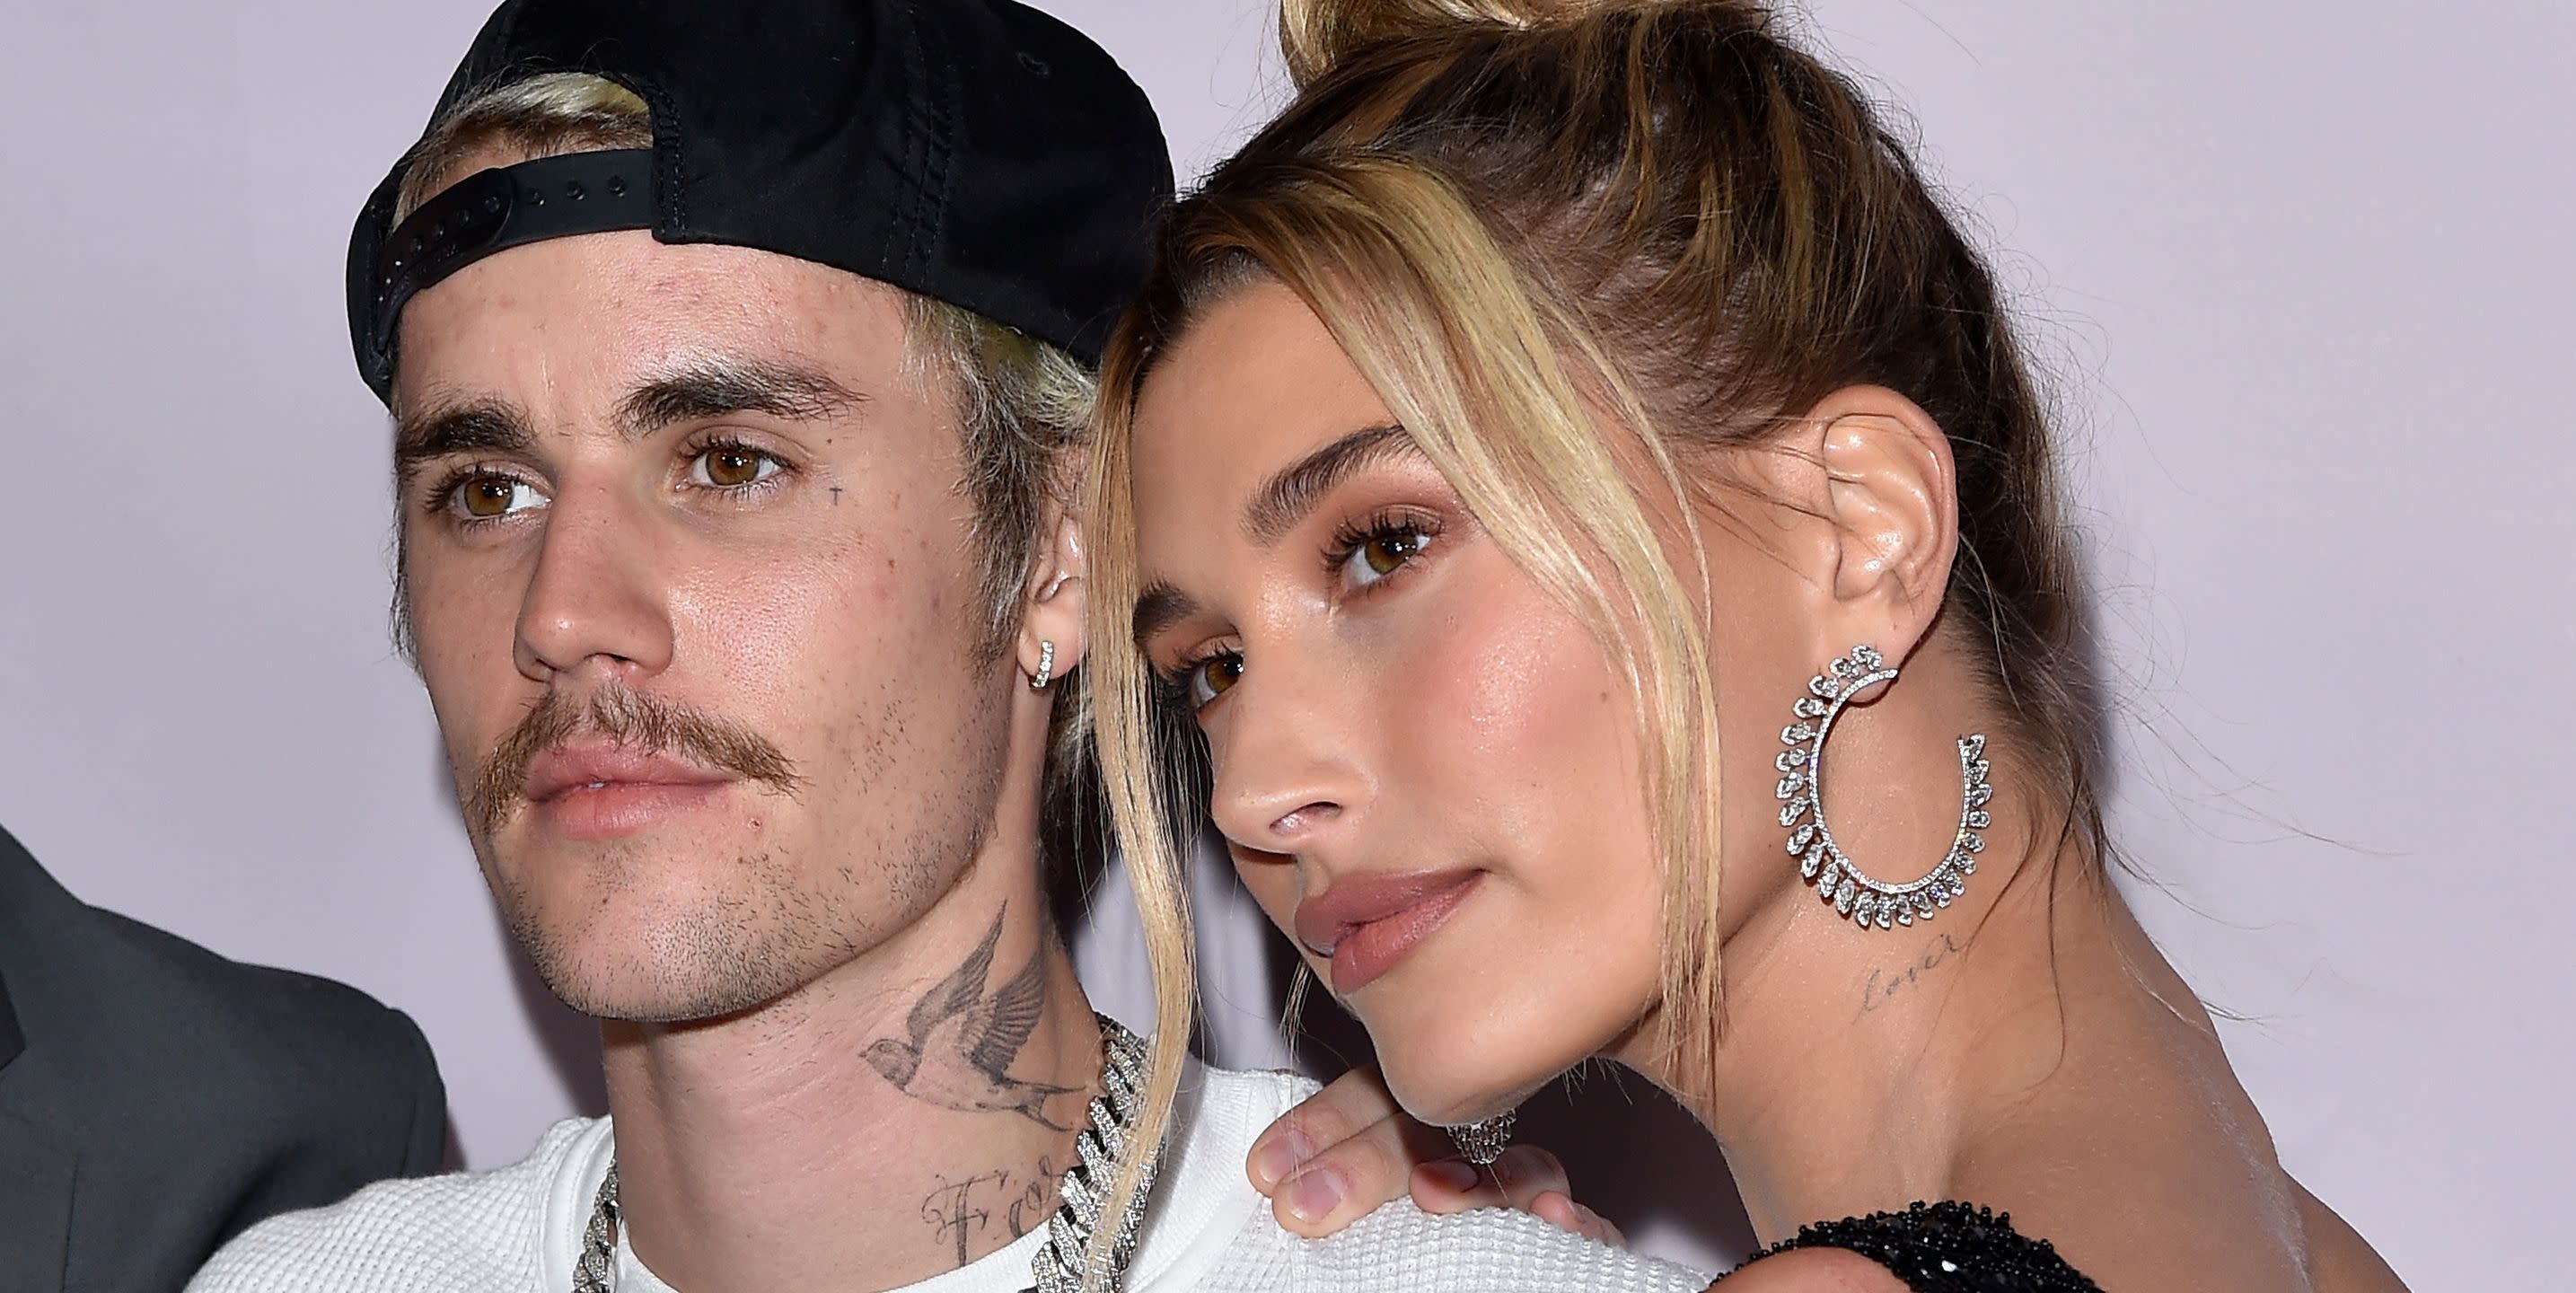 Hailey Bieber on how she recovered from Justin Bieber breakup